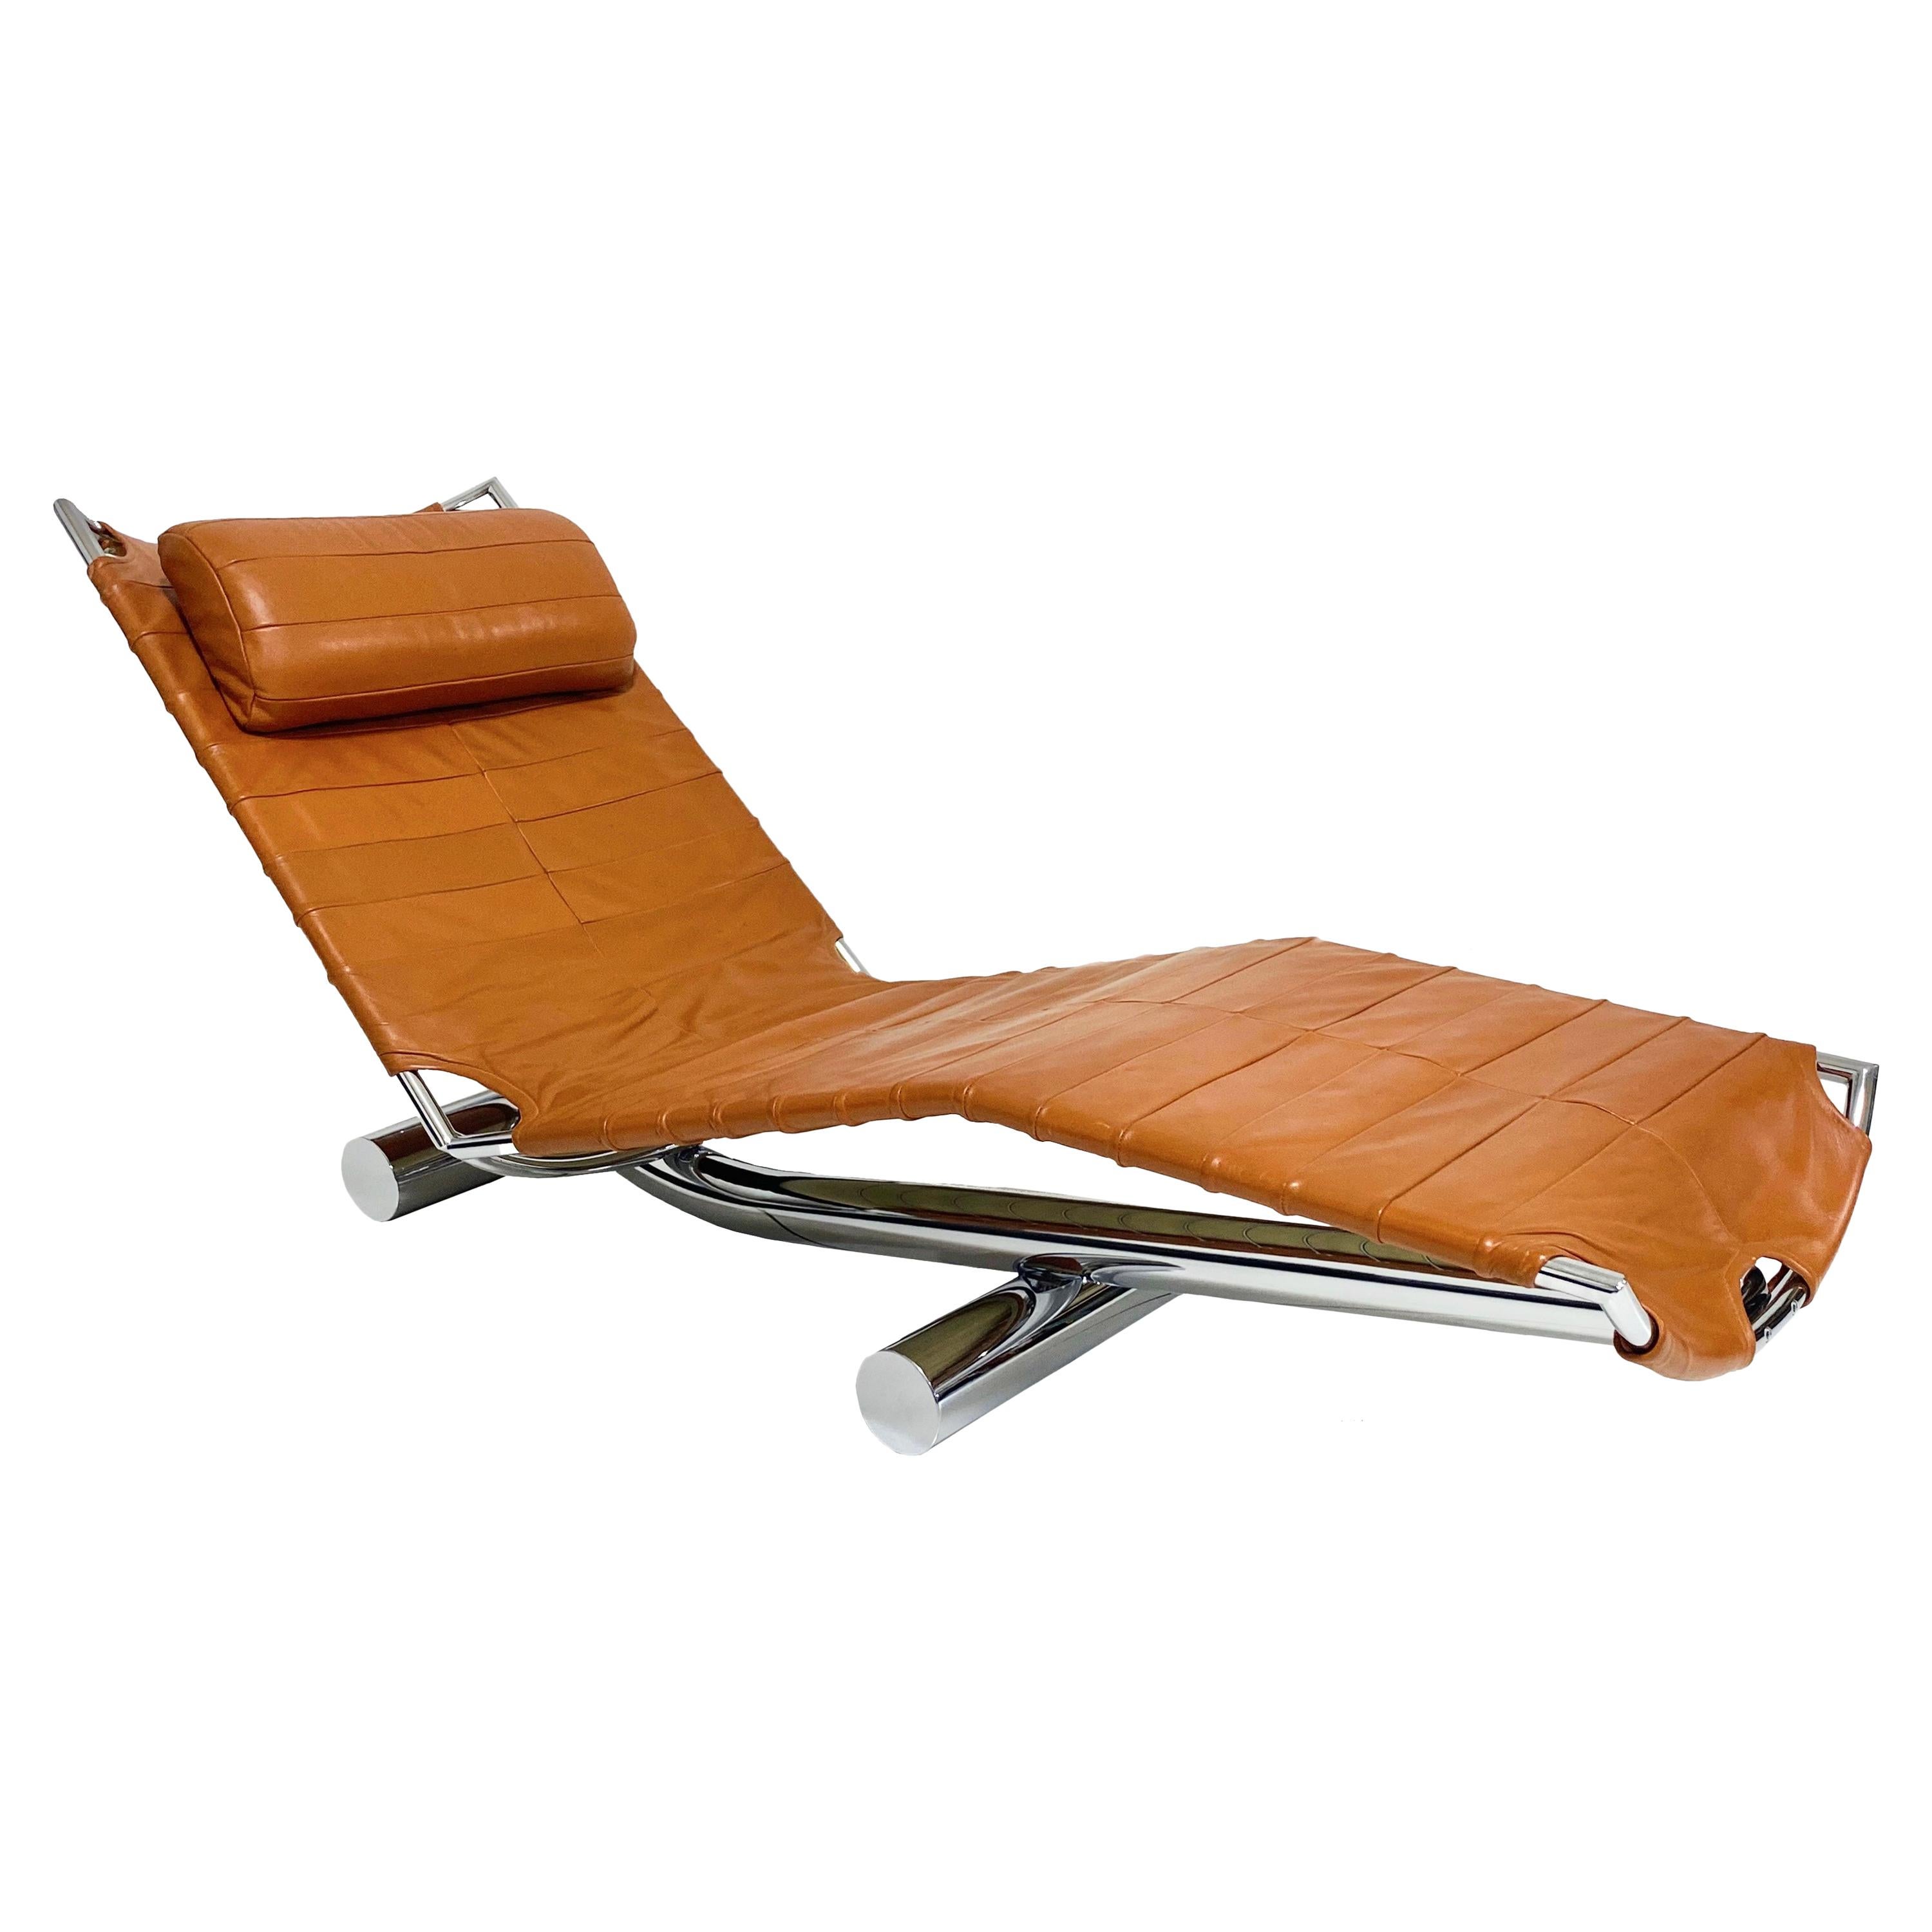 Paul Tuttle Chariot Chaise for Strassle Intl., 1972